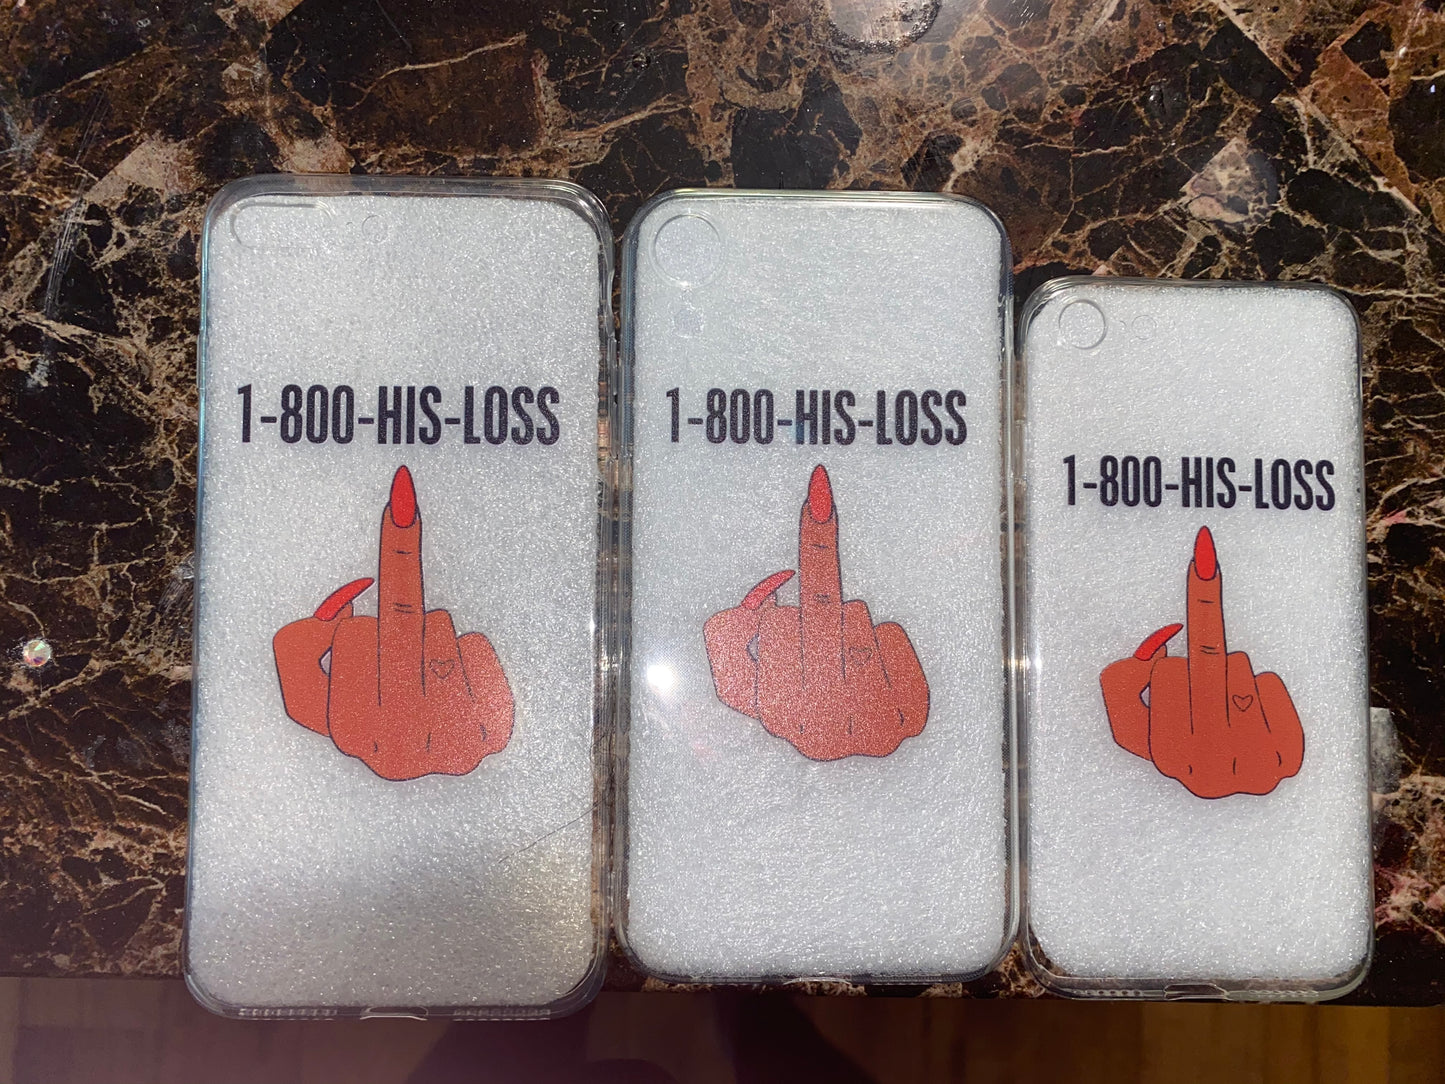 His Loss iPhone Case